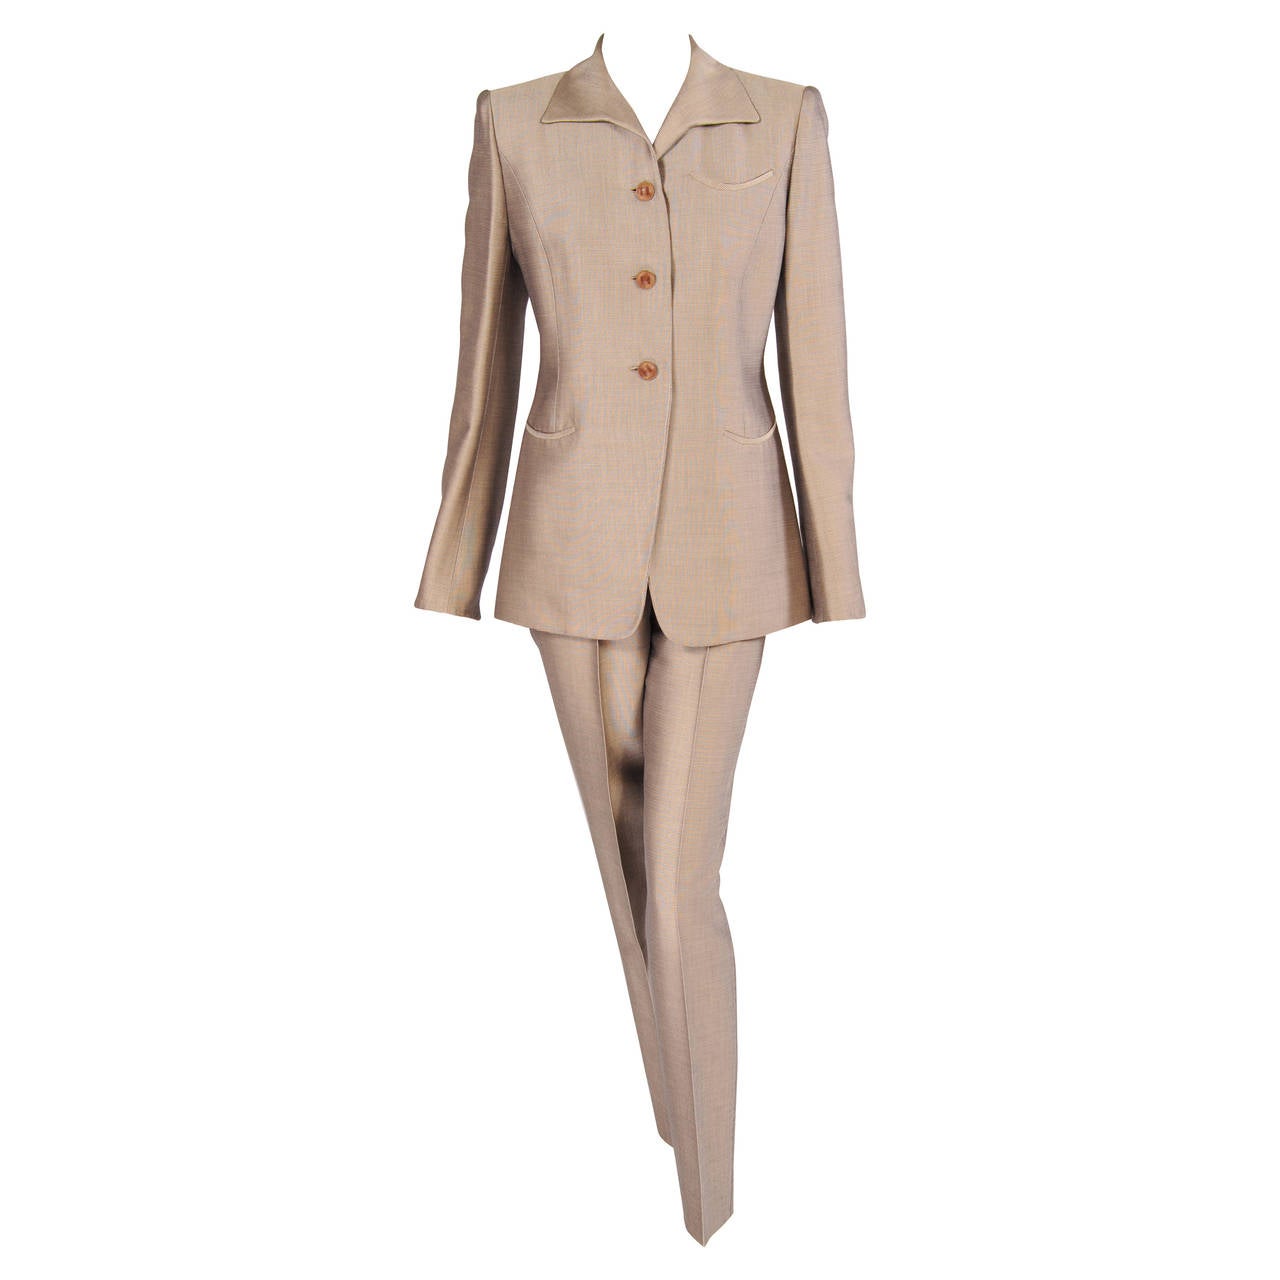 Hermes, Paris Silk Twill Jacket and Pants For Sale at 1stdibs